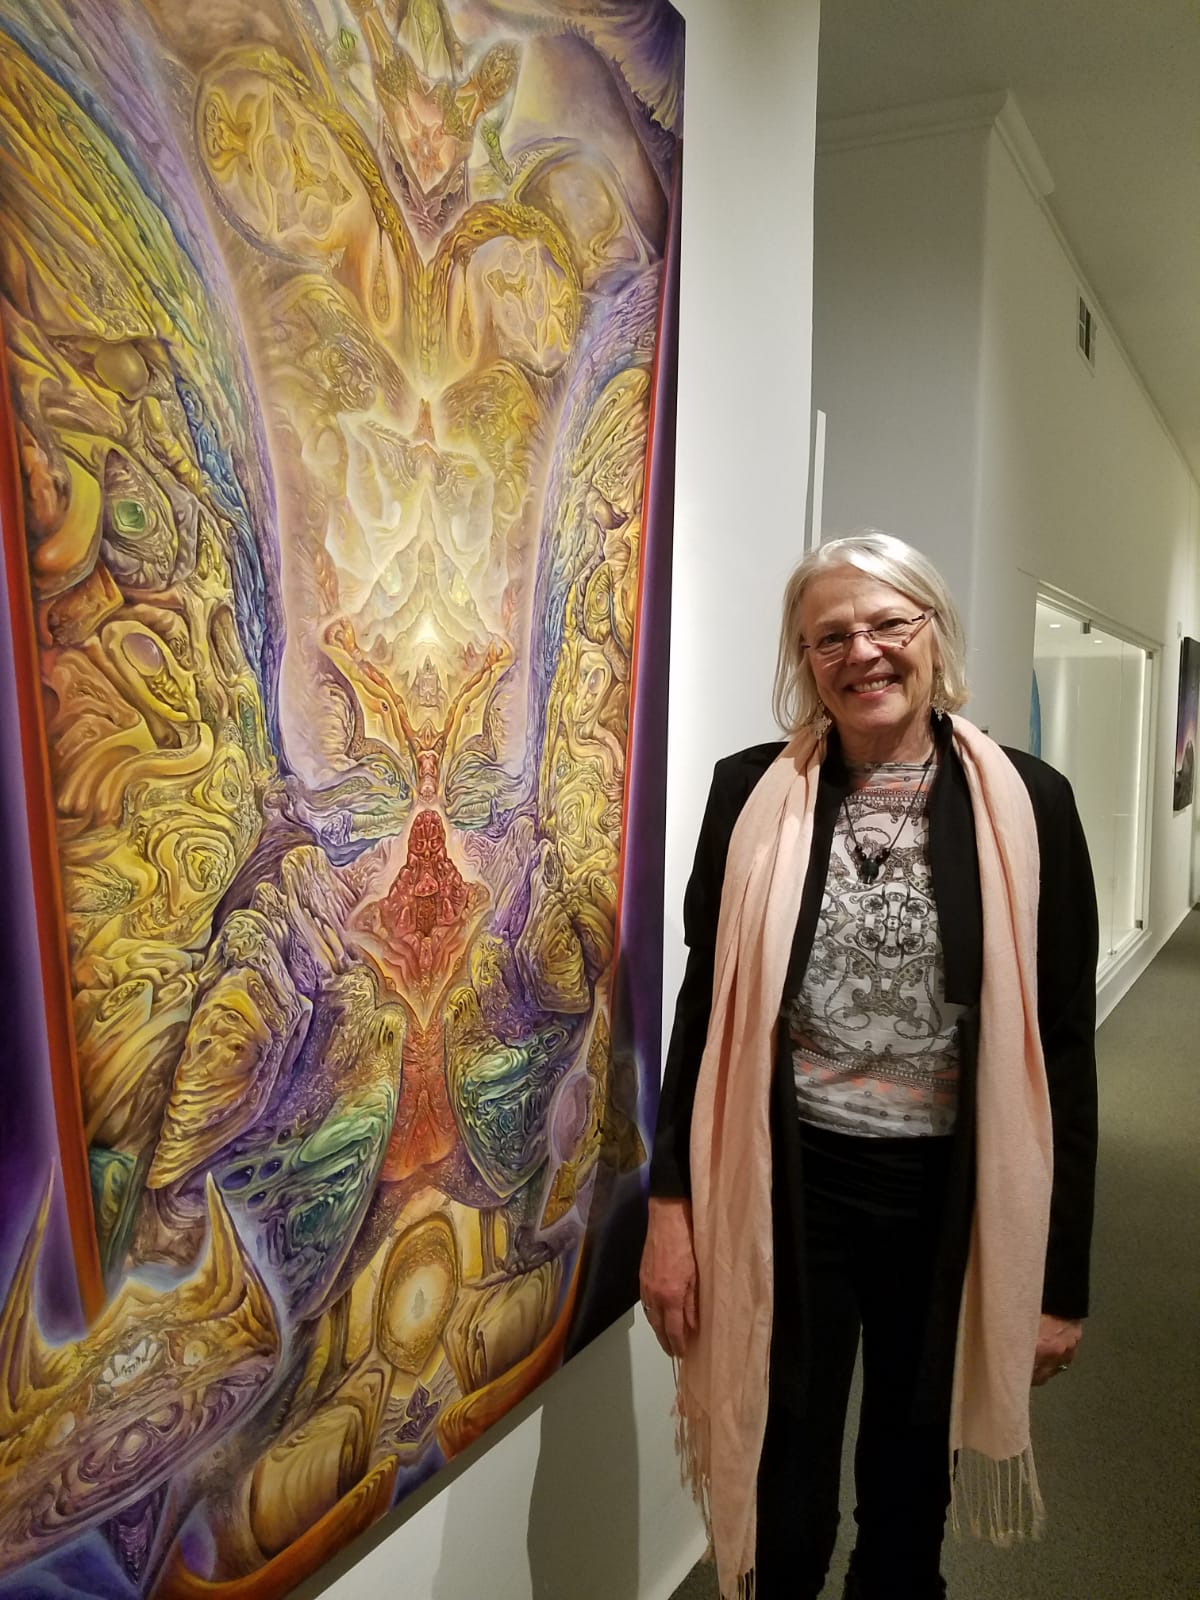 Deborah Parrish Snyder at the Secret Drugs of Buddhism book launch marvelling @phaneros_art's visionary gallery.